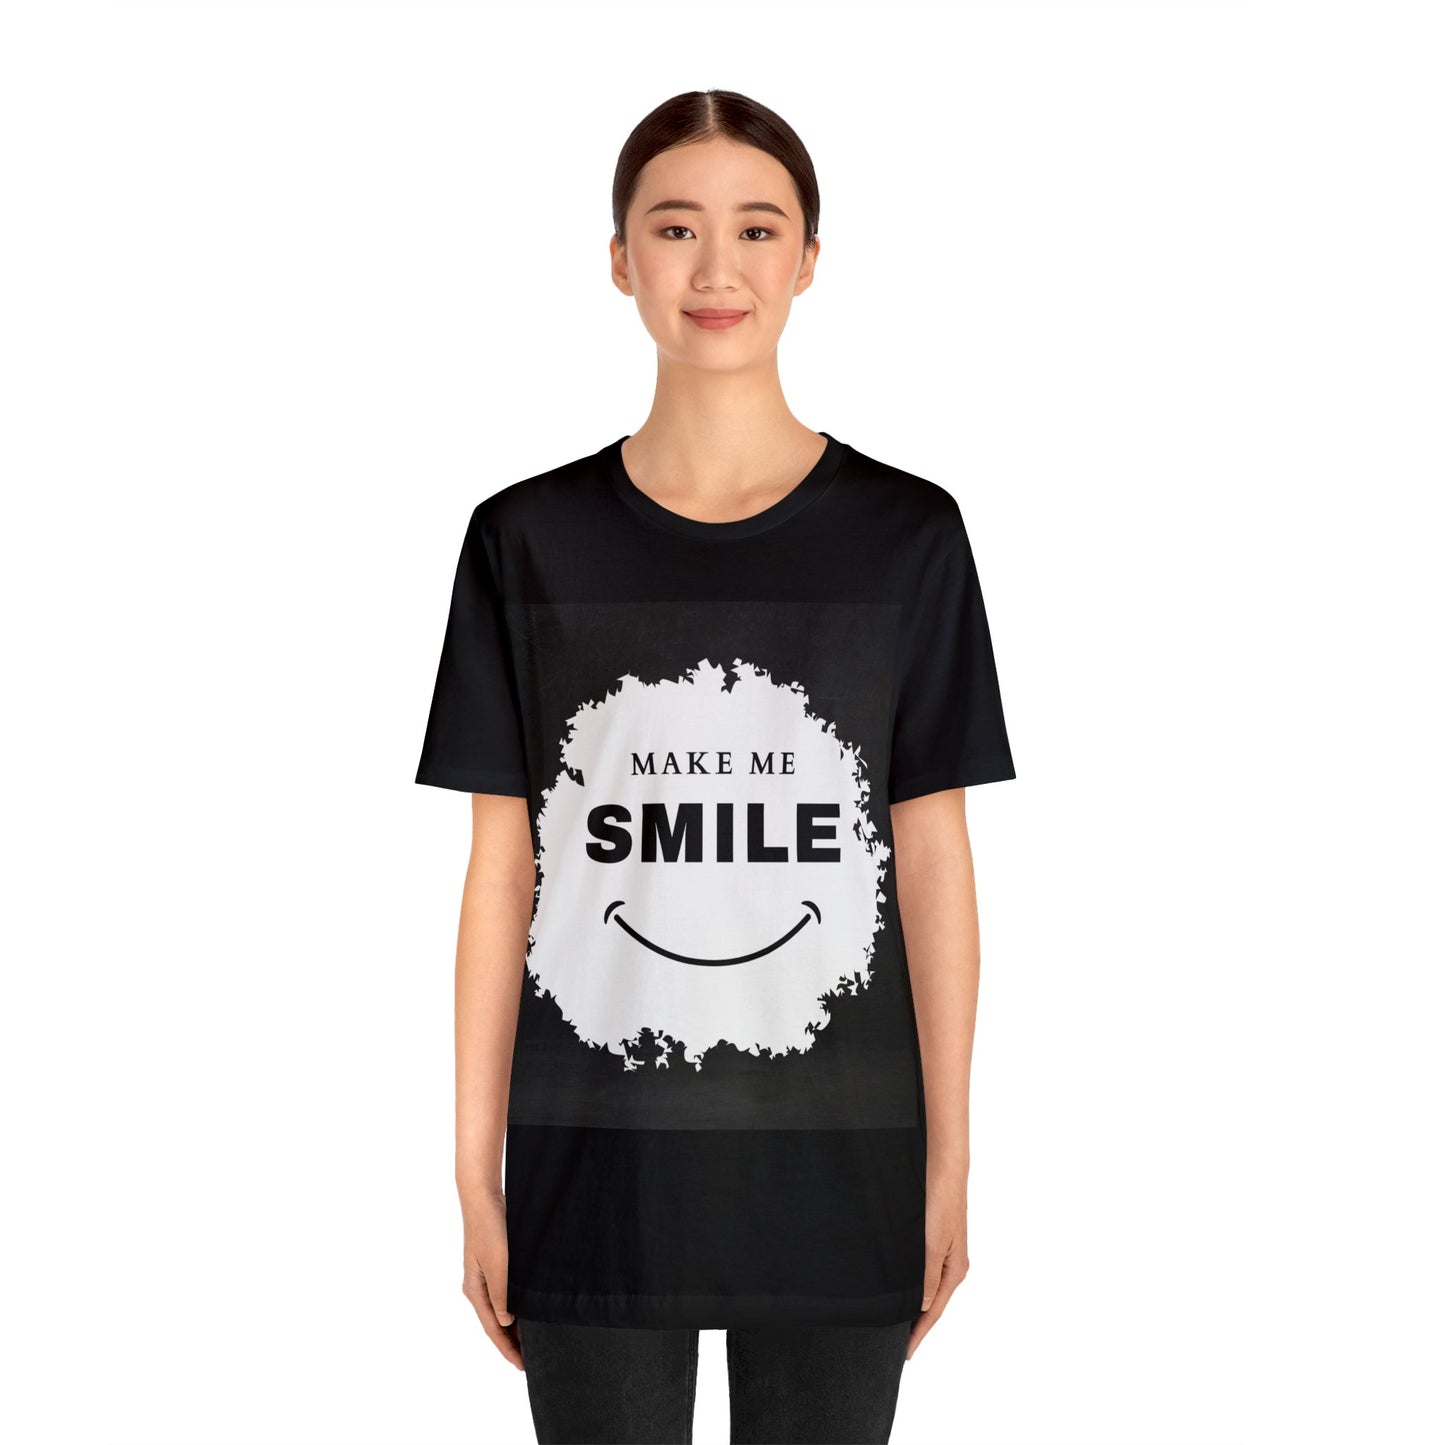 Make Me Smile - Graphic T Shirt for Men and Women